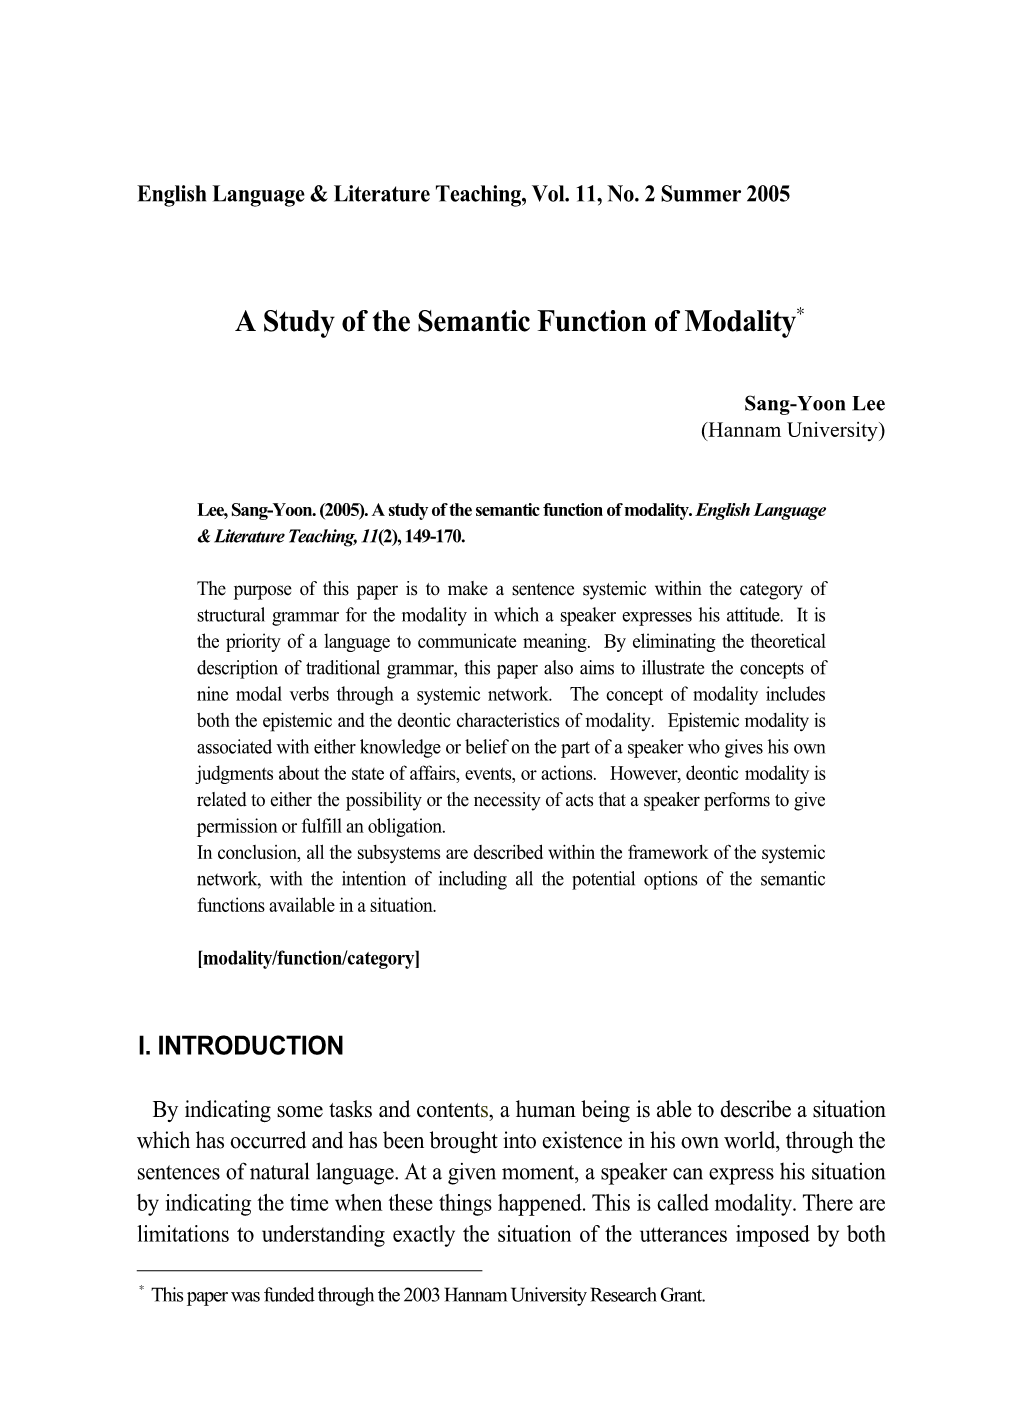 A Study of the Semantic Function of Modality*